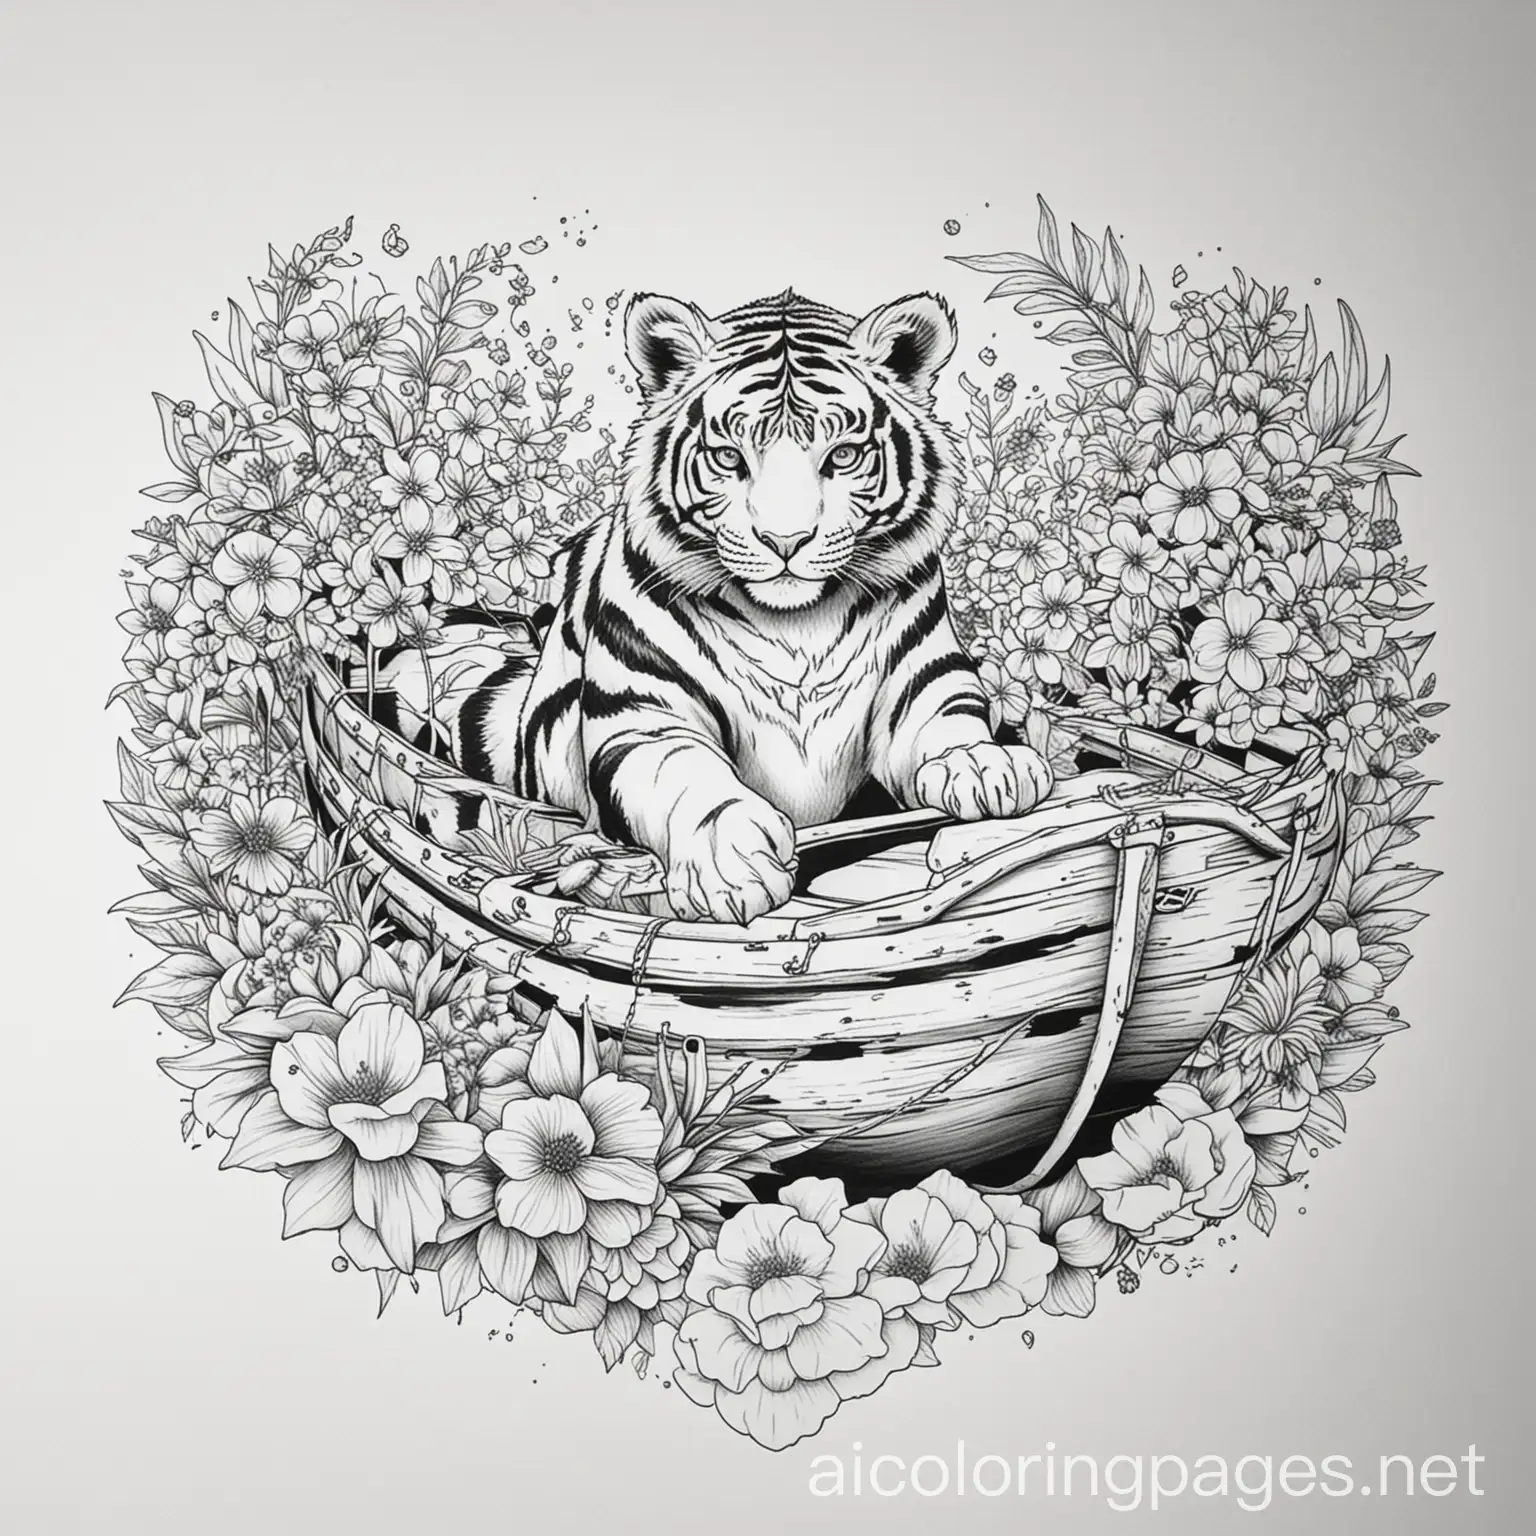 Flowers-and-Tiger-with-Naruto-Inspired-Elements-Coloring-Page